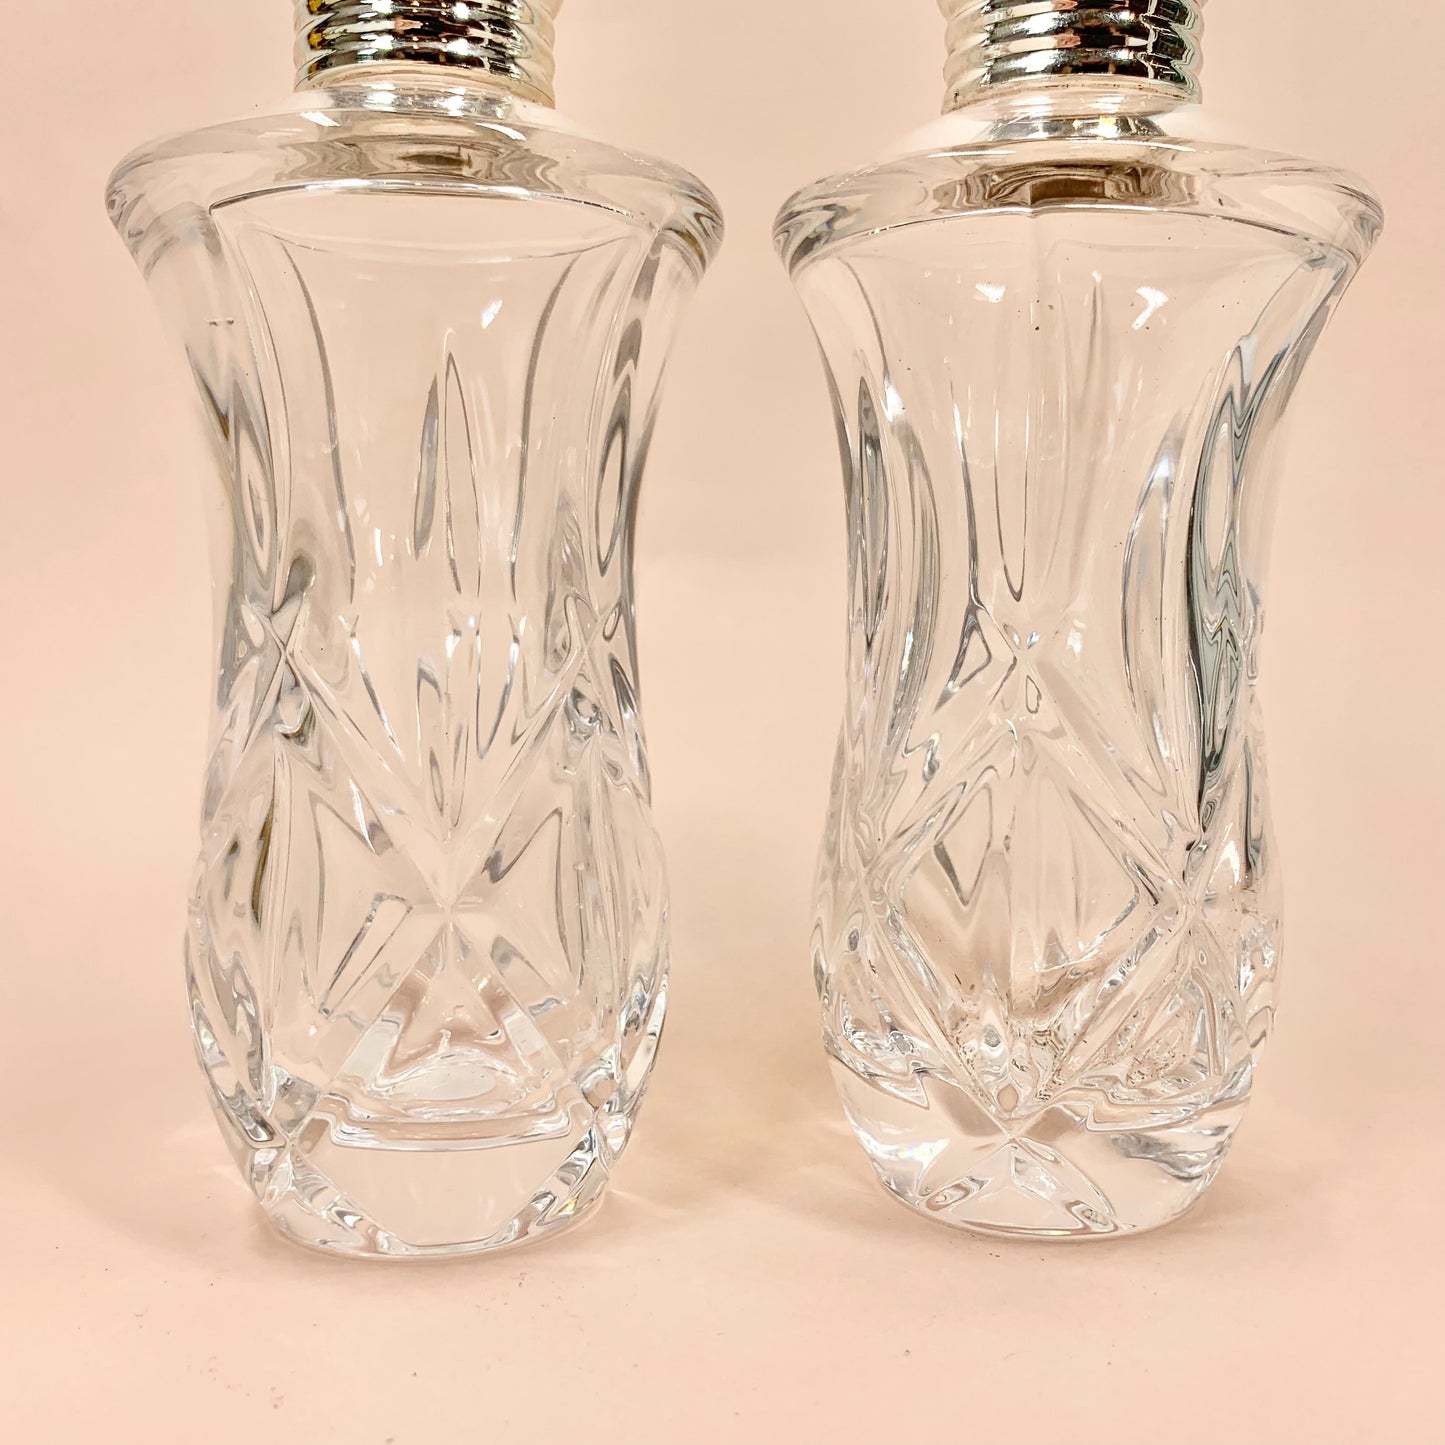 Antique Bohemian crystal salt and pepper shakers